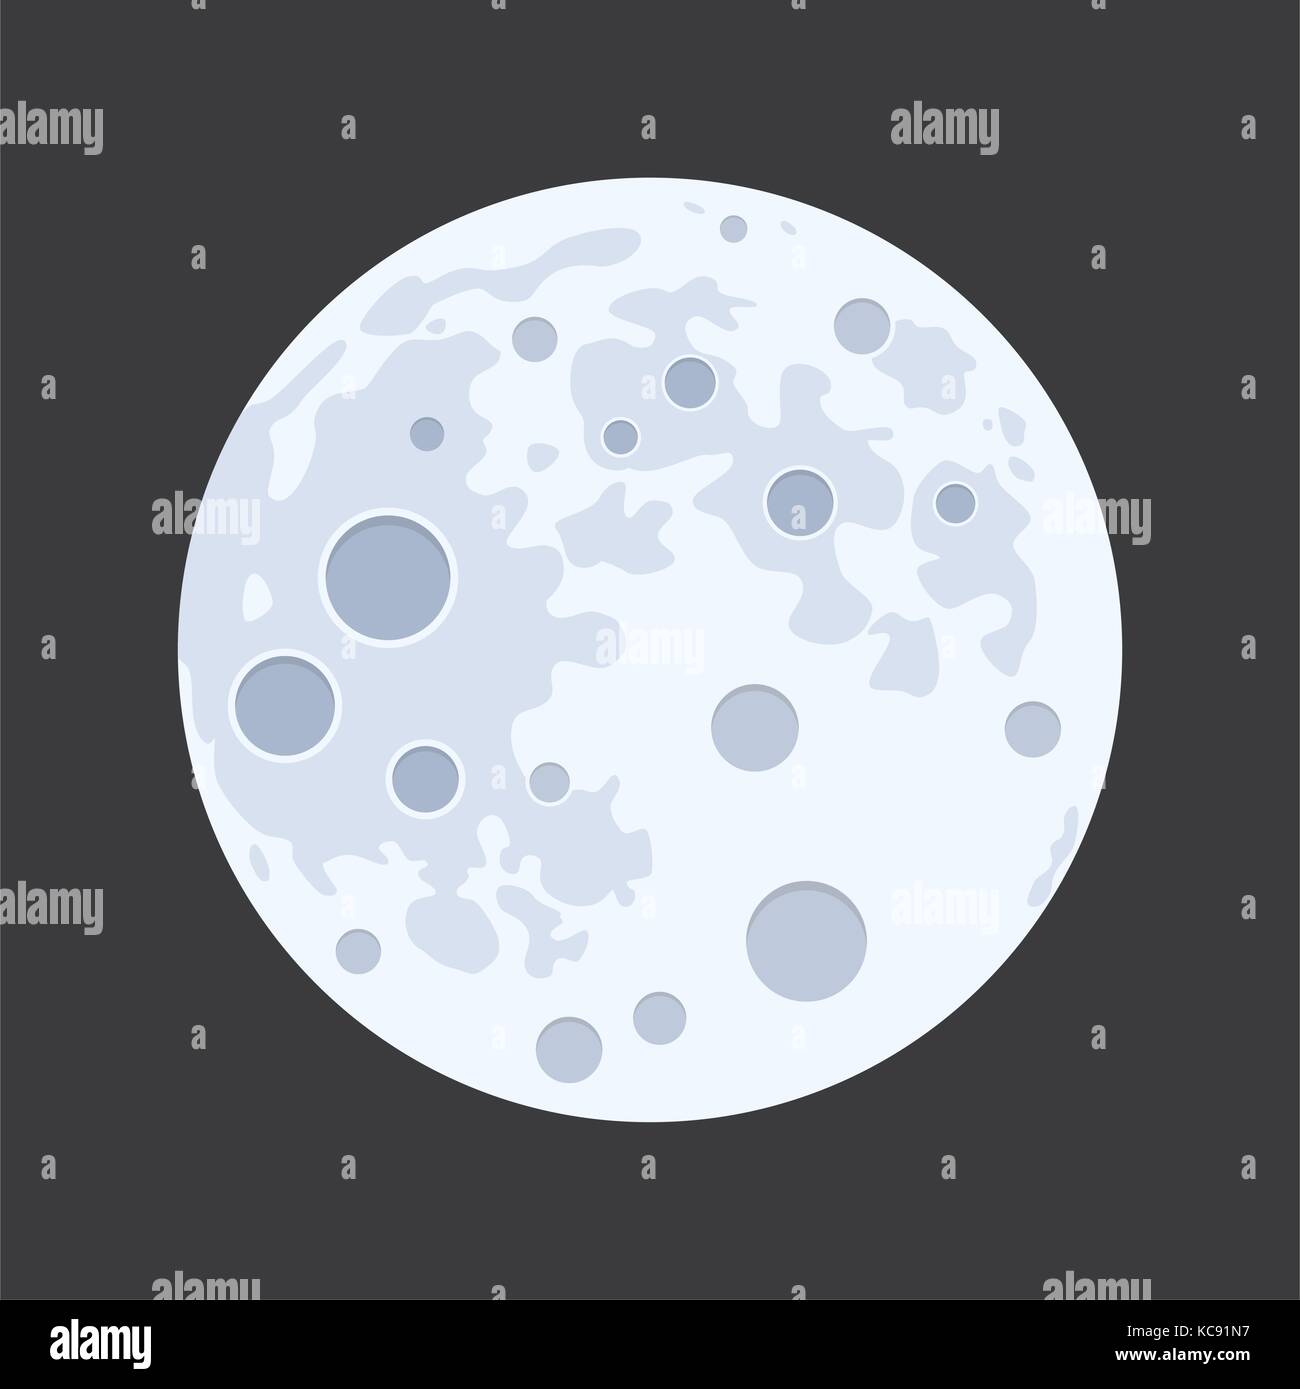 vector illustration of full moon isolated on black background. flat design style of abstract moon surface Stock Vector